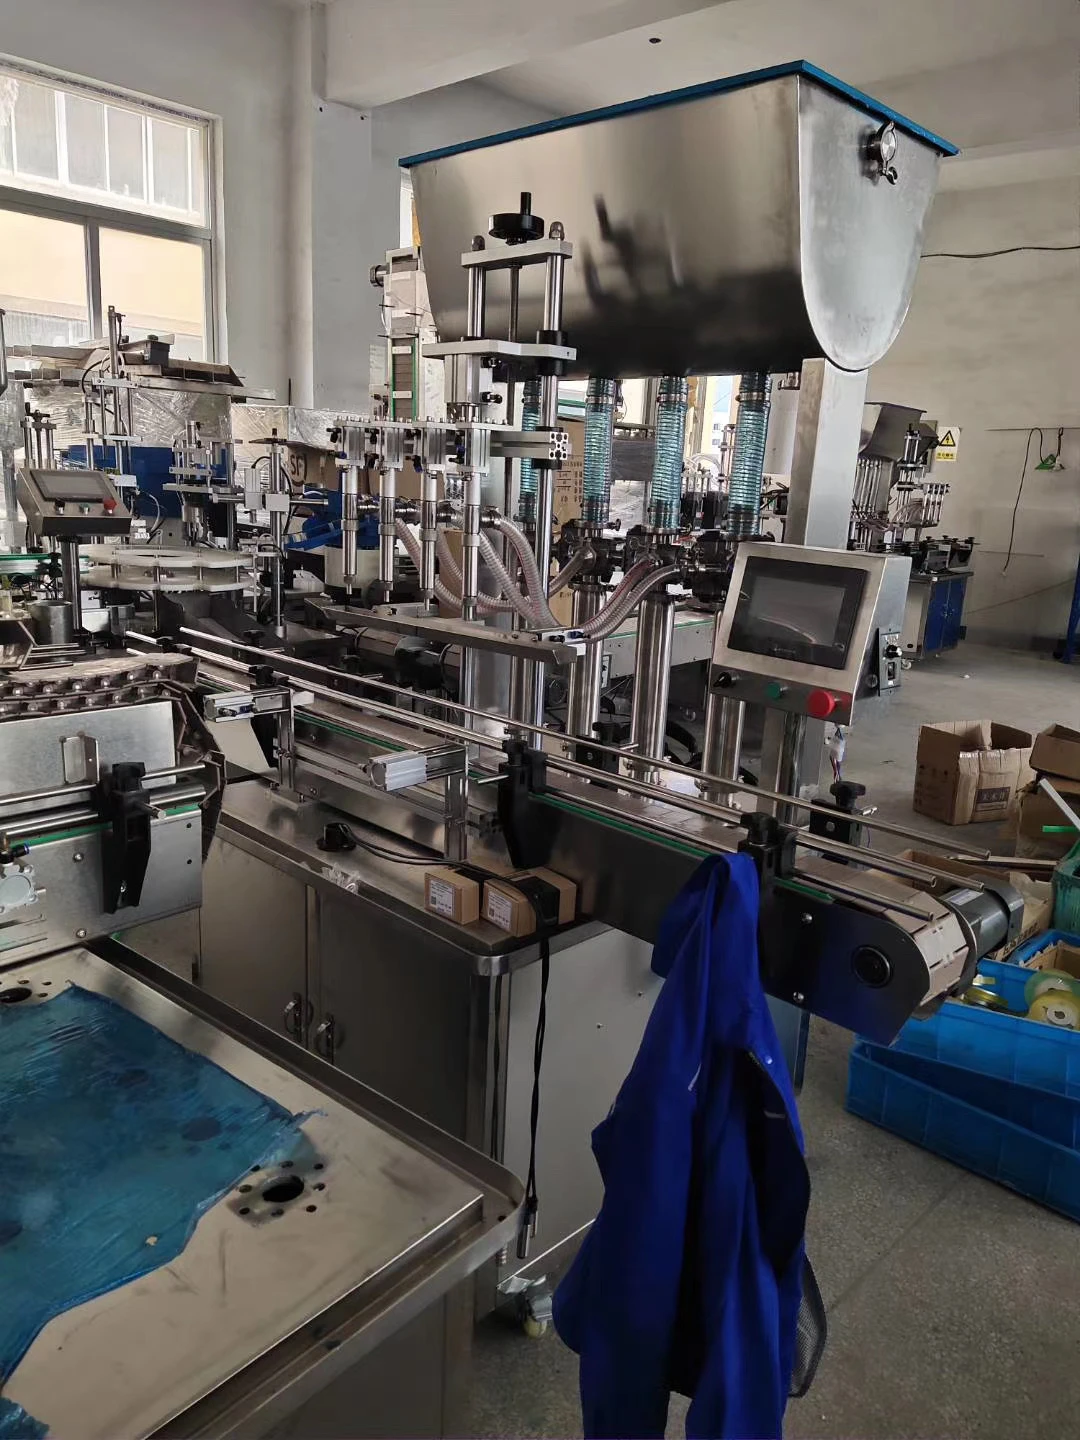 Hot Sale Automatic Filling Machine Packaging Machine Automatic production line equipment